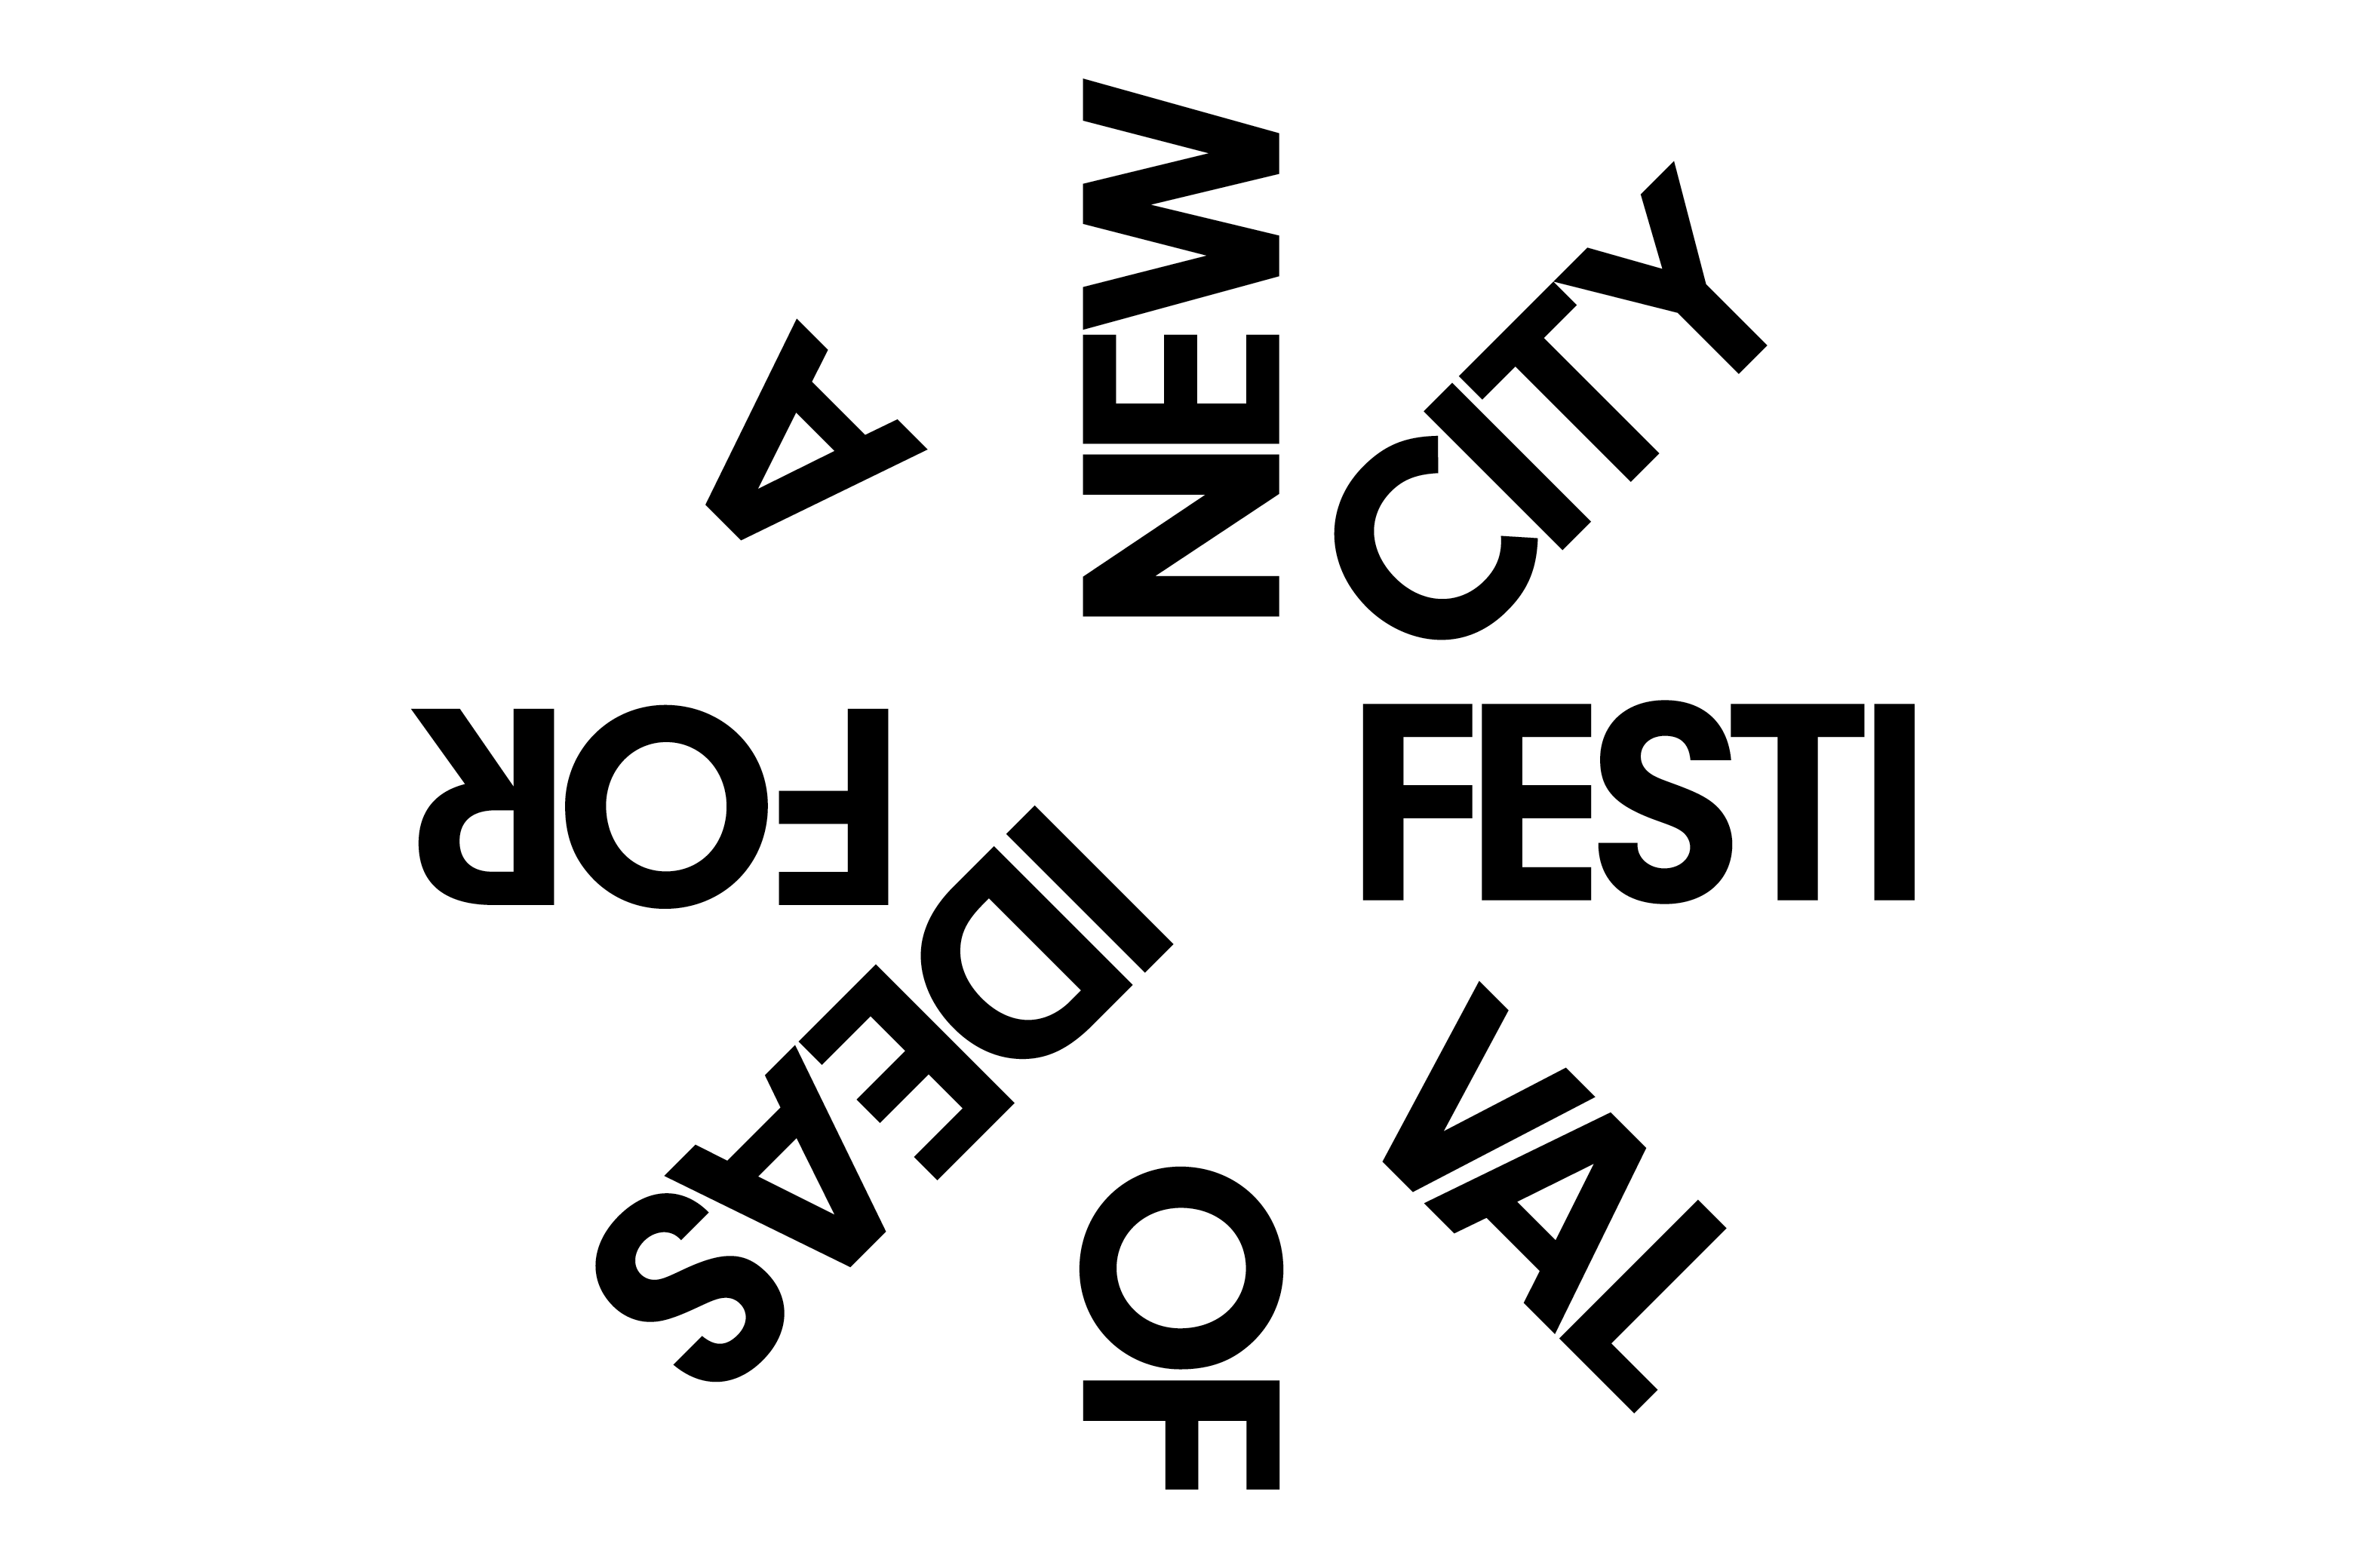 Festival of Ideas for a New City proposal  - MTWTF